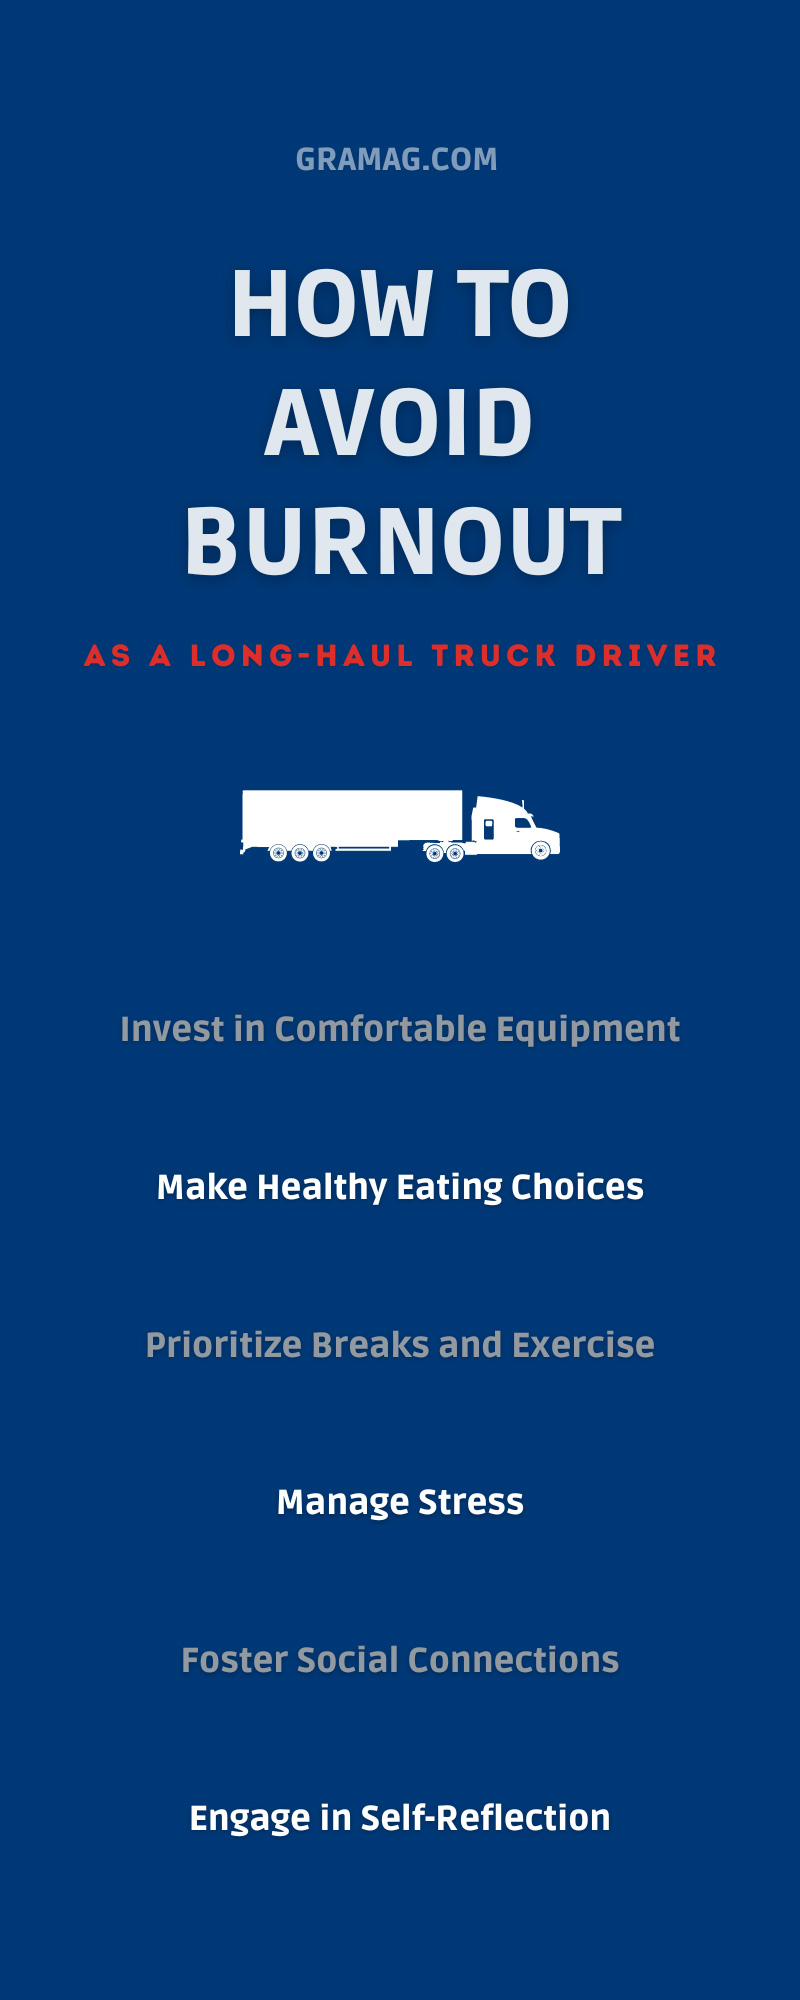 How To Avoid Burnout as a Long-Haul Truck Driver